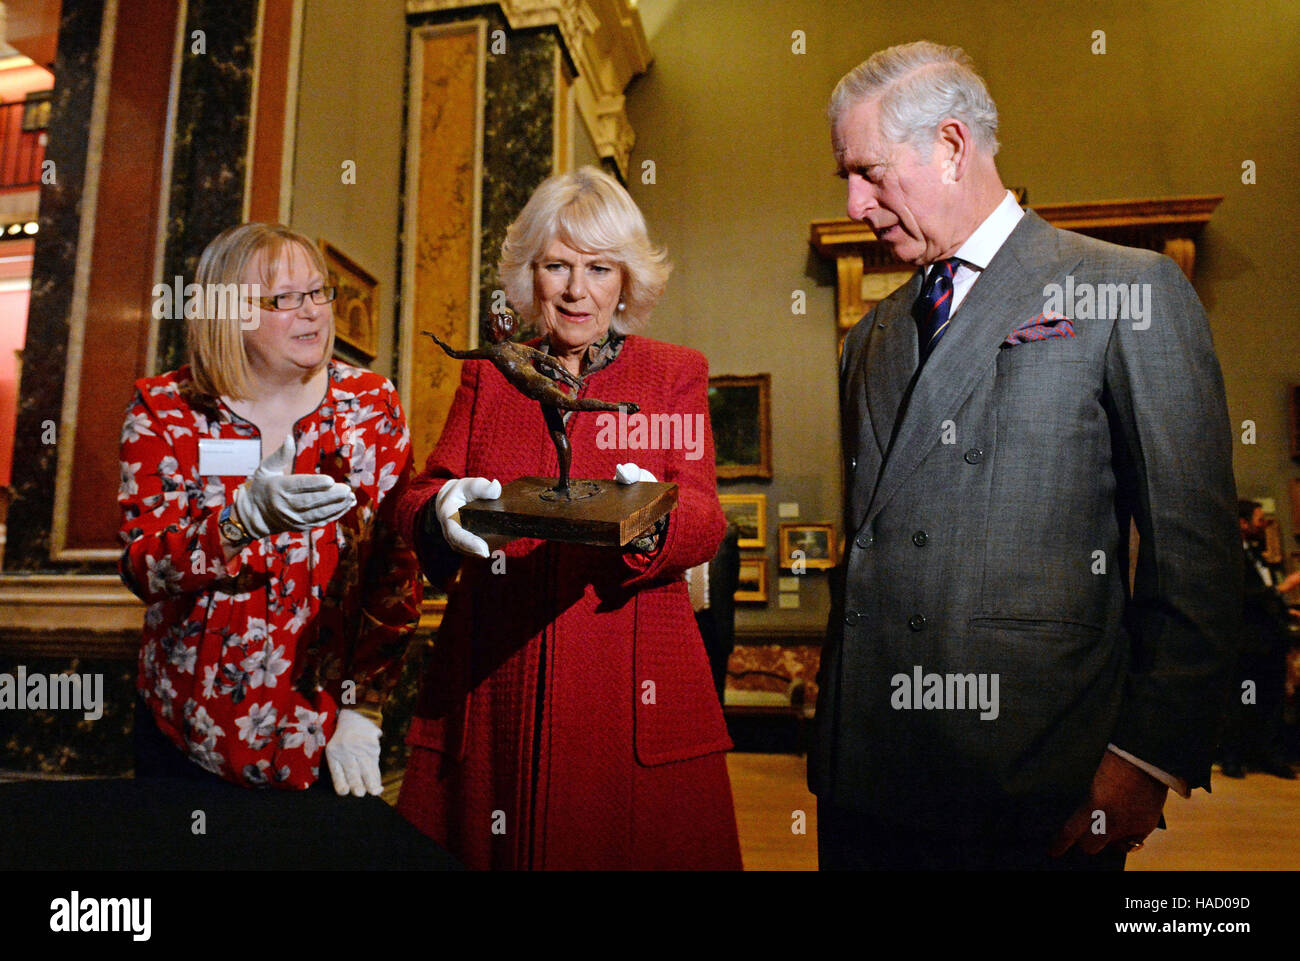 The Duchess of Cornwall holds a wax sculpture by Edgar Degas titled Arabesque over the Right Leg, Left Arm in Front as she and the Prince of Wales visit the University of Cambridge's Fitzwilliam Museum to mark its bicentenary and to celebrate the 600th anniversary of the Cambridge University Library. Stock Photo